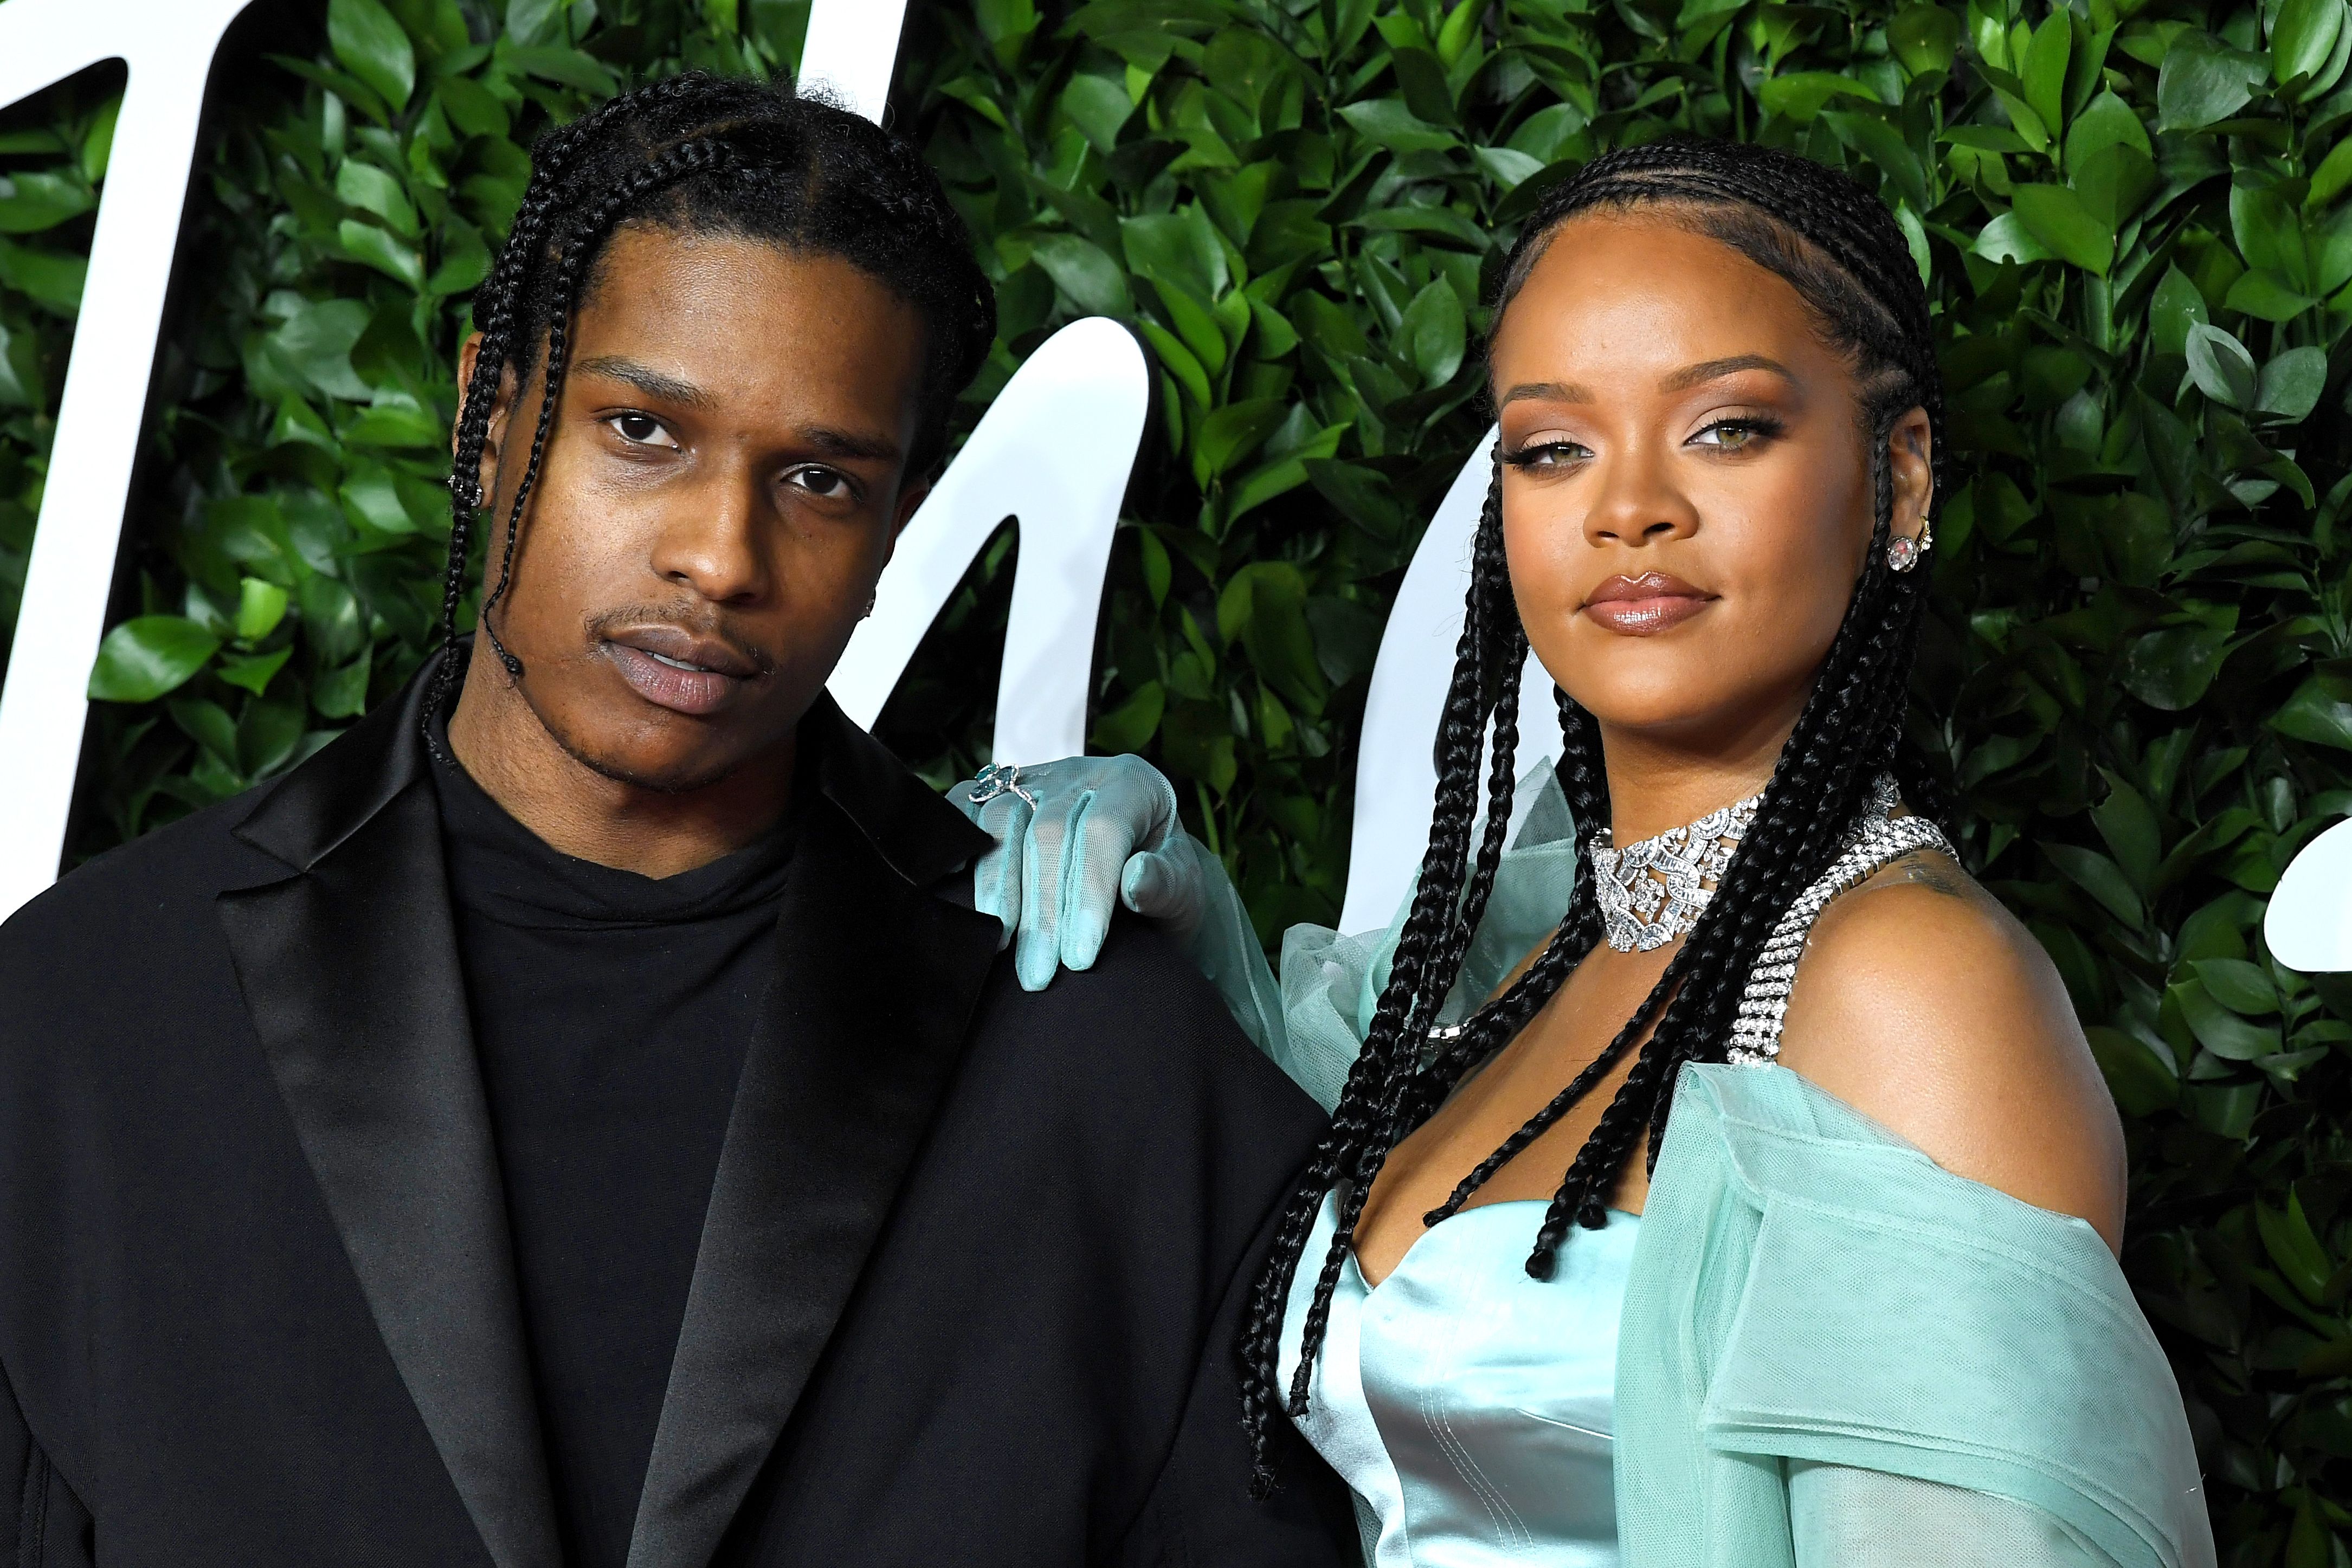 Rihanna's complete dating history: From Drake to A$AP Rocky